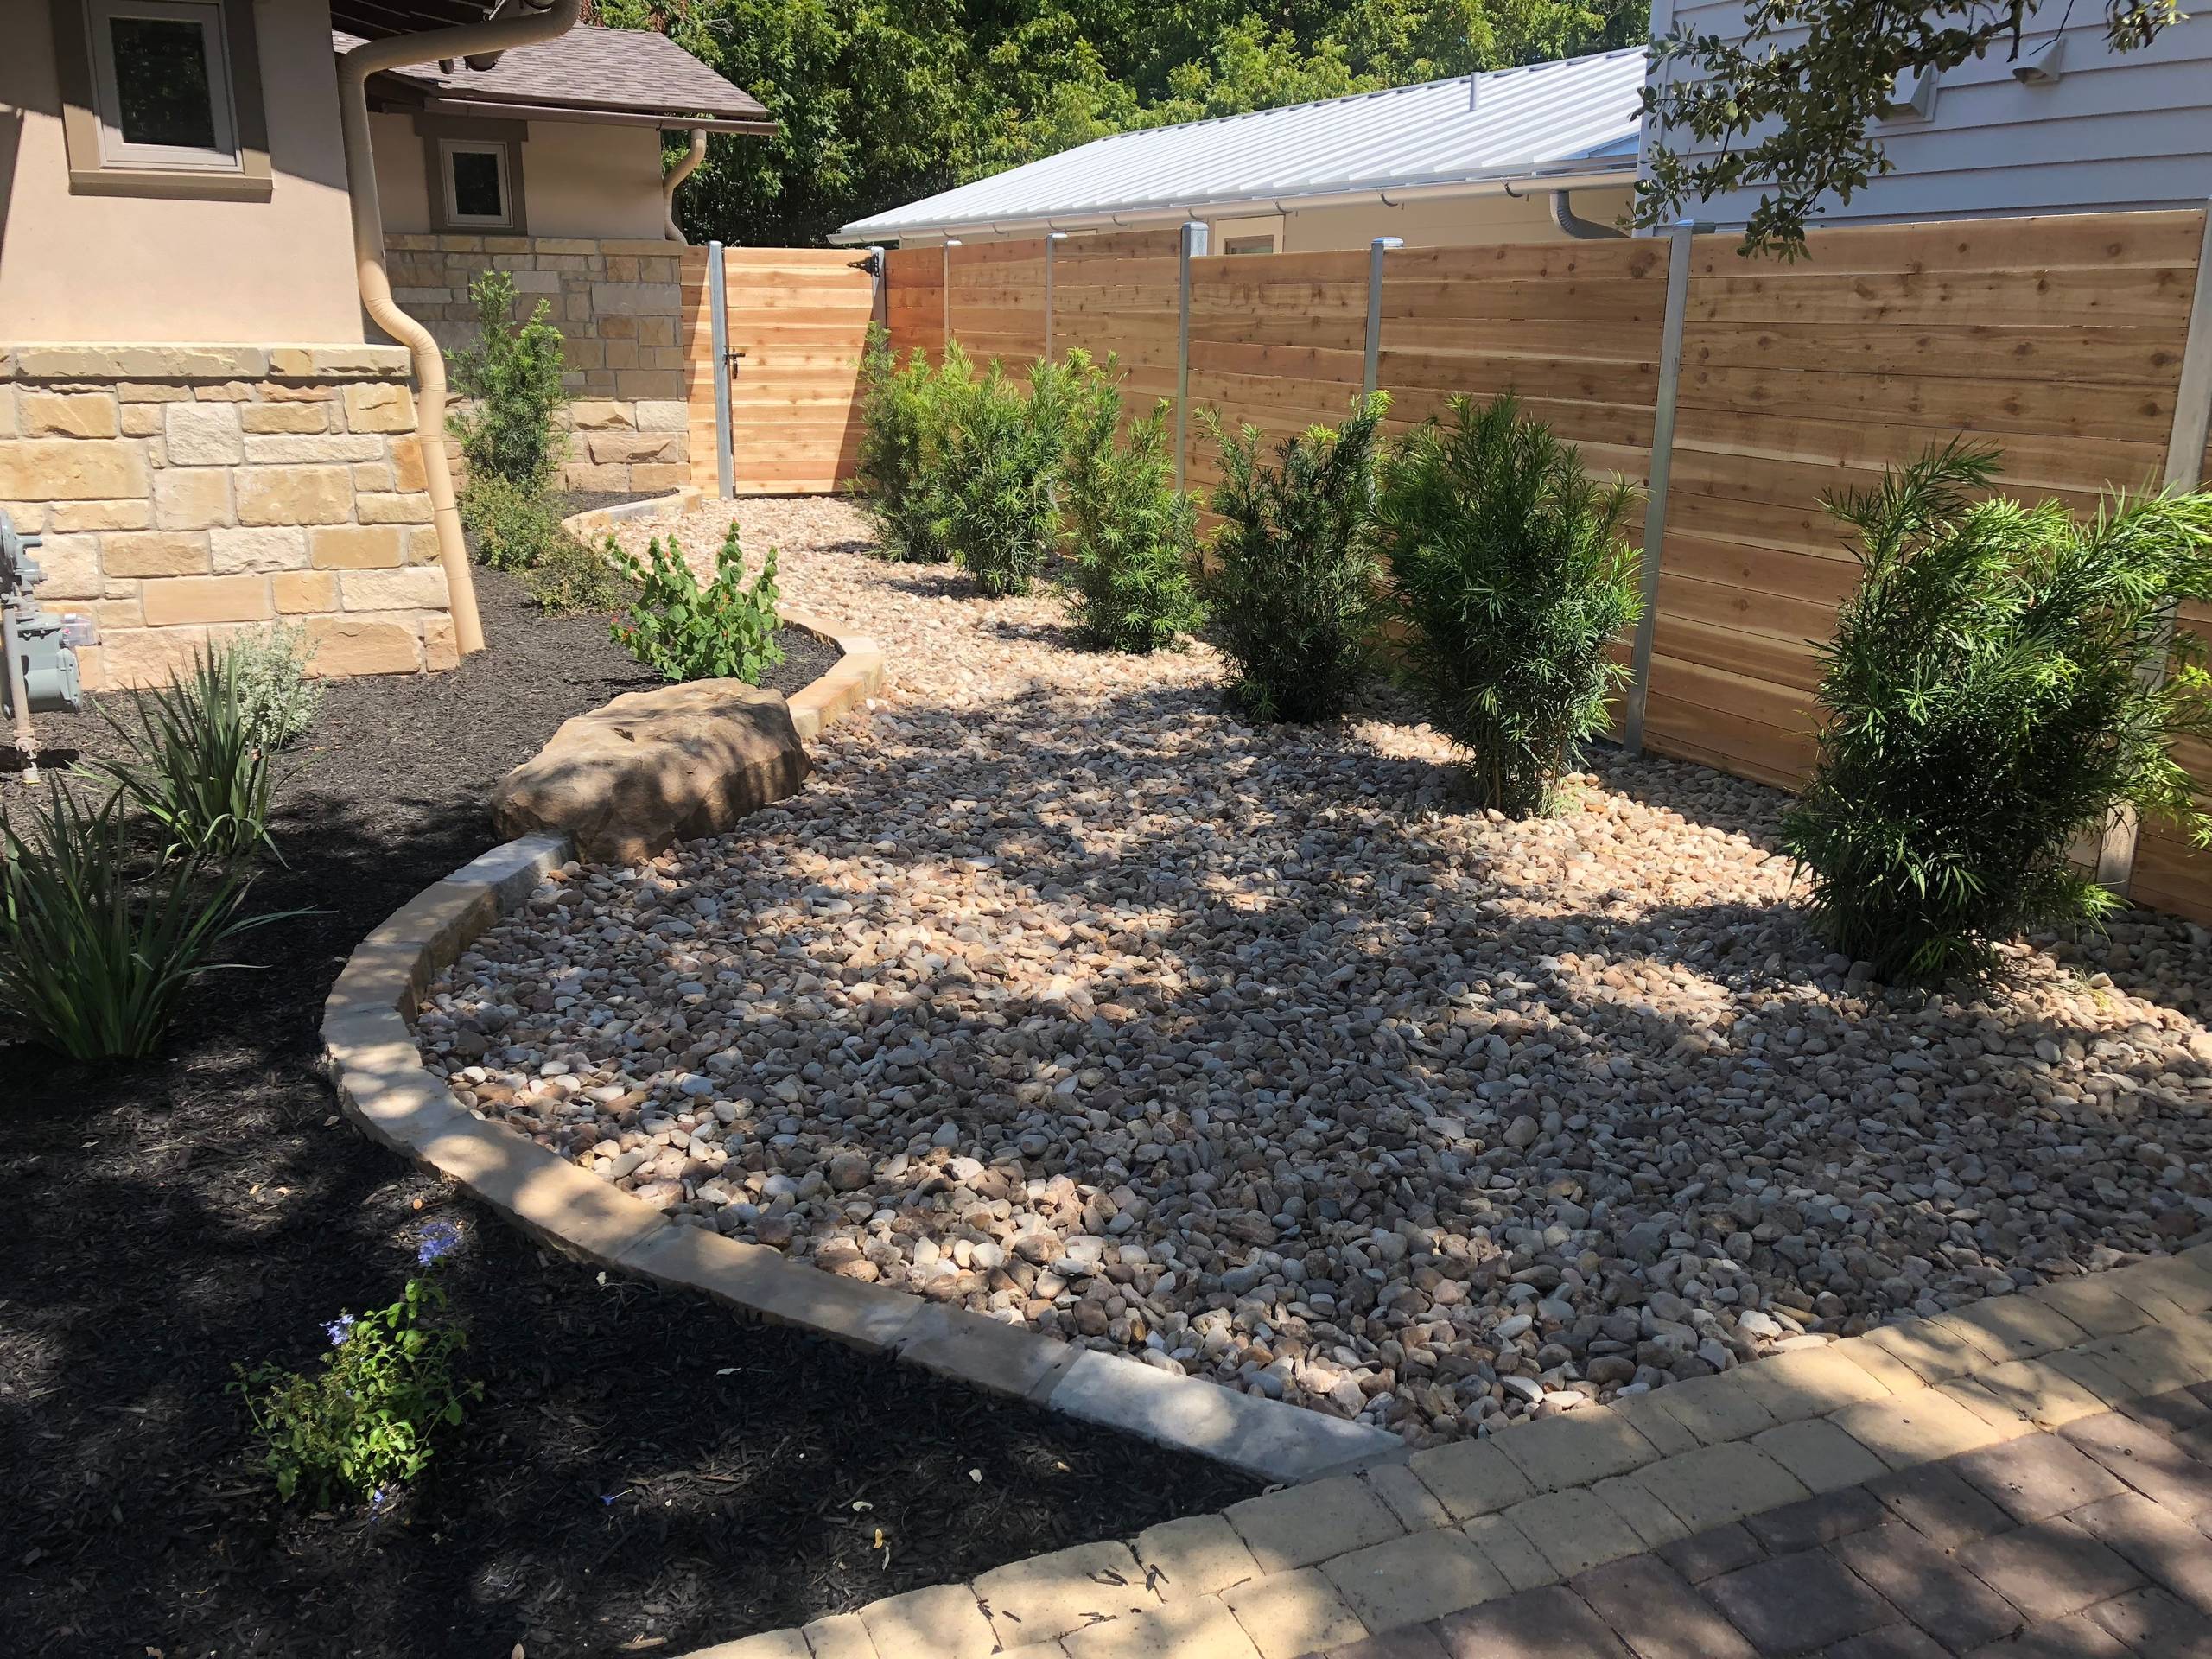 Combination of mulch and Colorado River Rock with "future" privacy shrubs